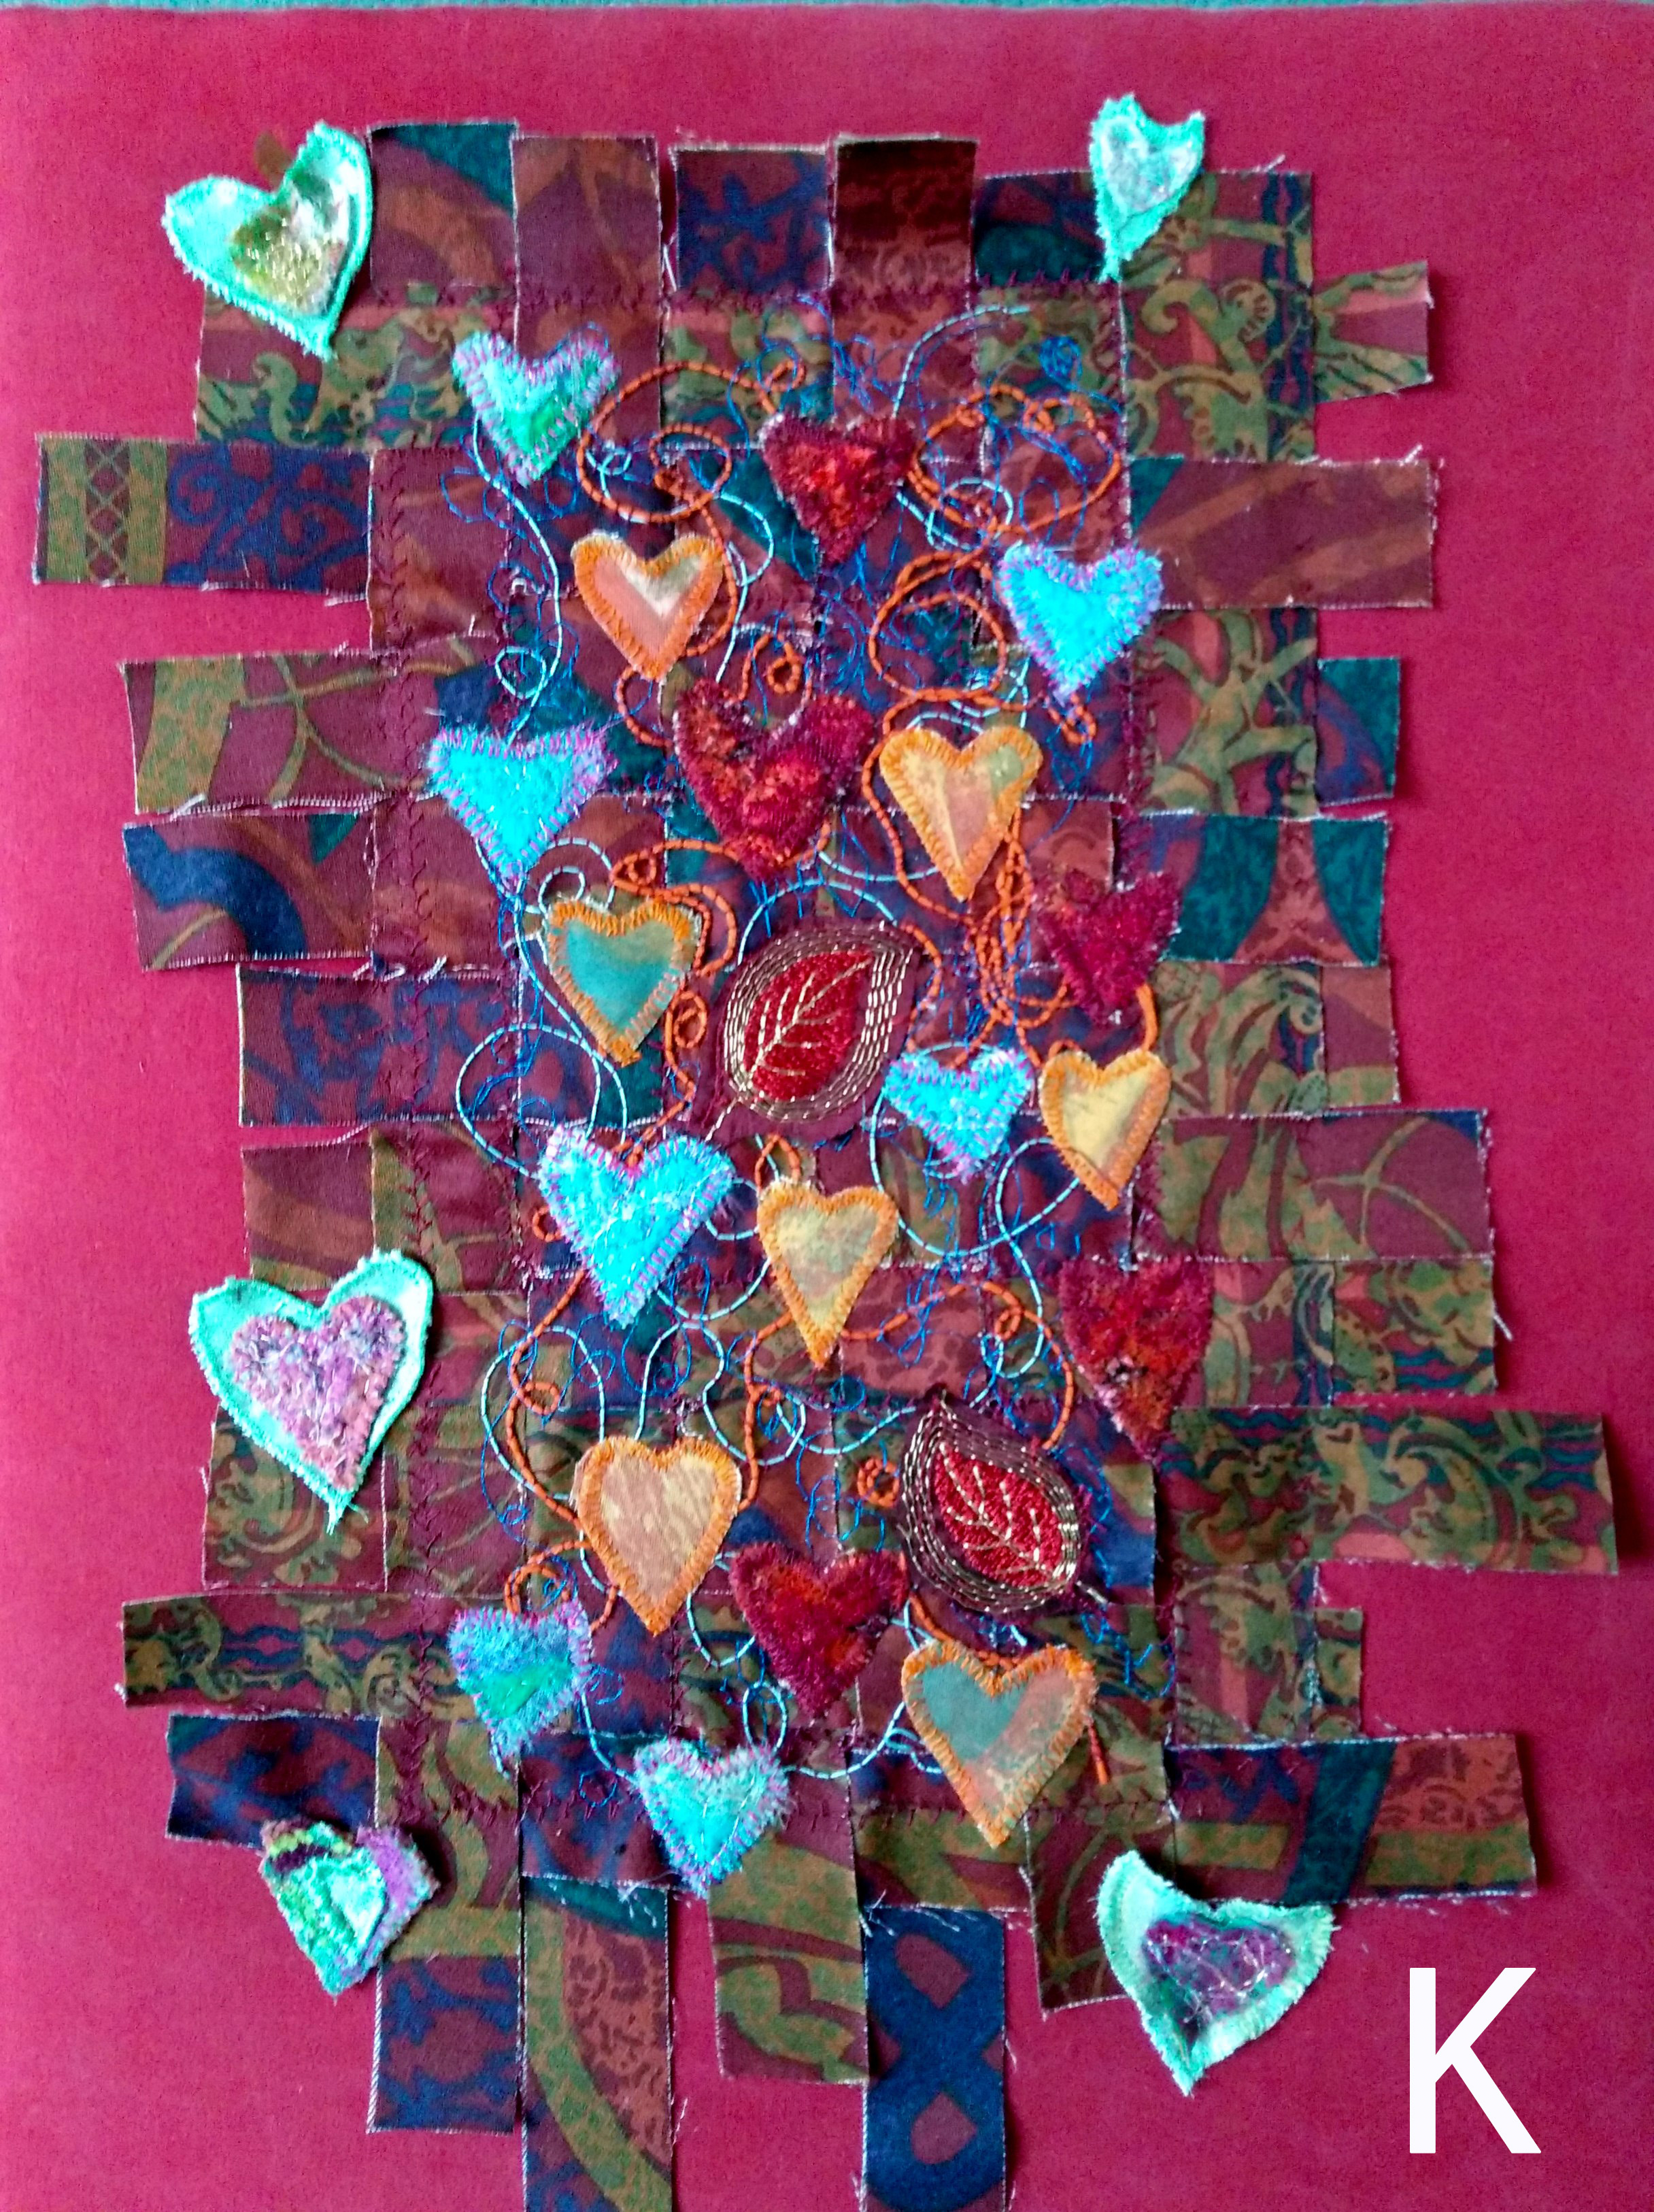 INTERWOVEN LOVE, woven strips of fabric, machined at random with added machine embroidery and applique hearts, Rose Bowl competition 2021